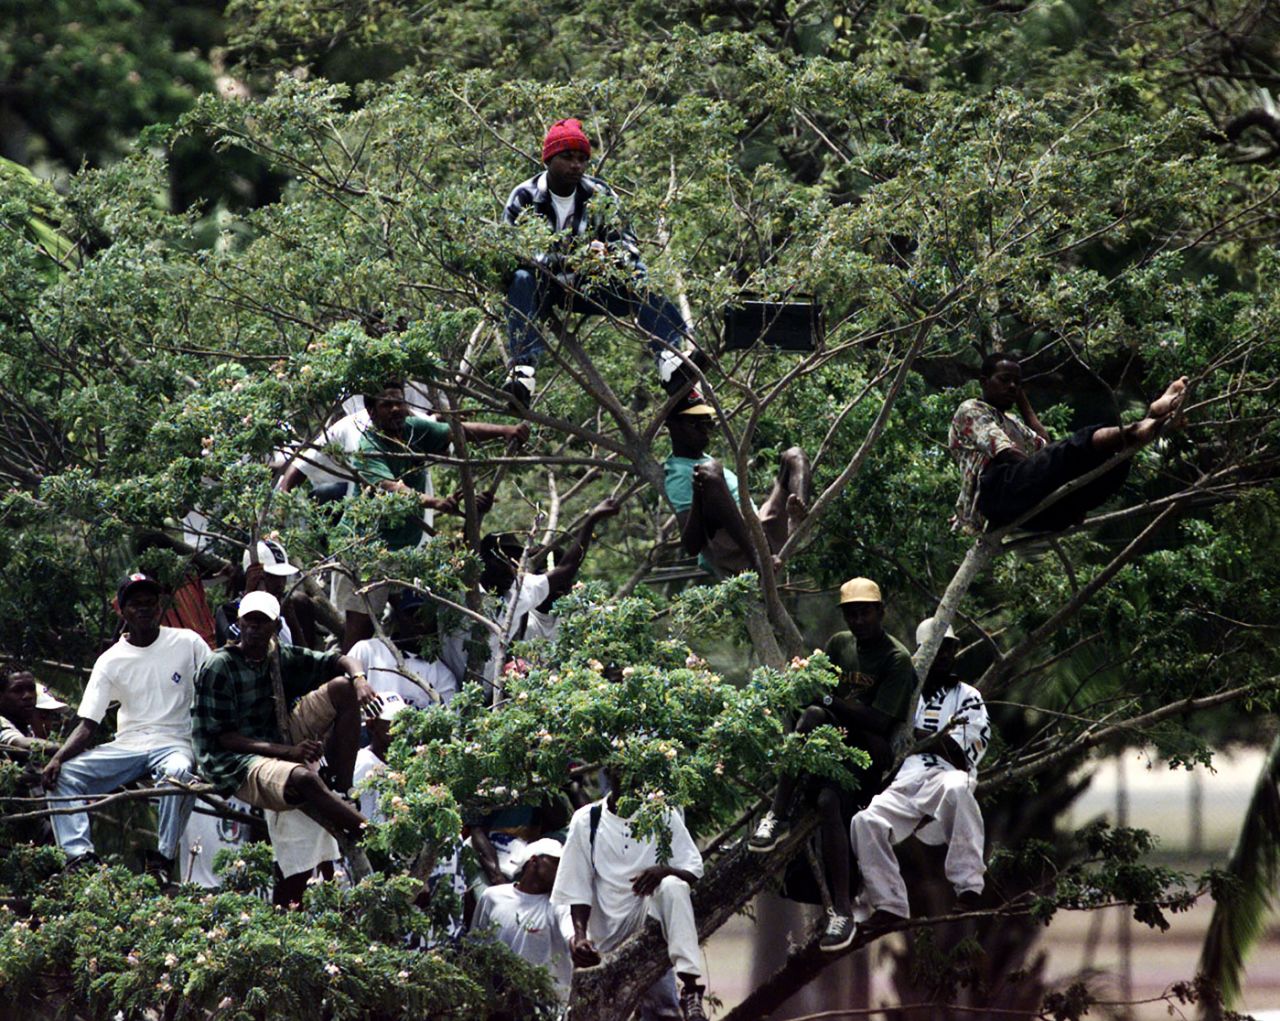 Fans watch the action from a tree outside the Bourda Oval, West Indies v England, 4th Test, Georgetown, 2nd day, February 28, 1998